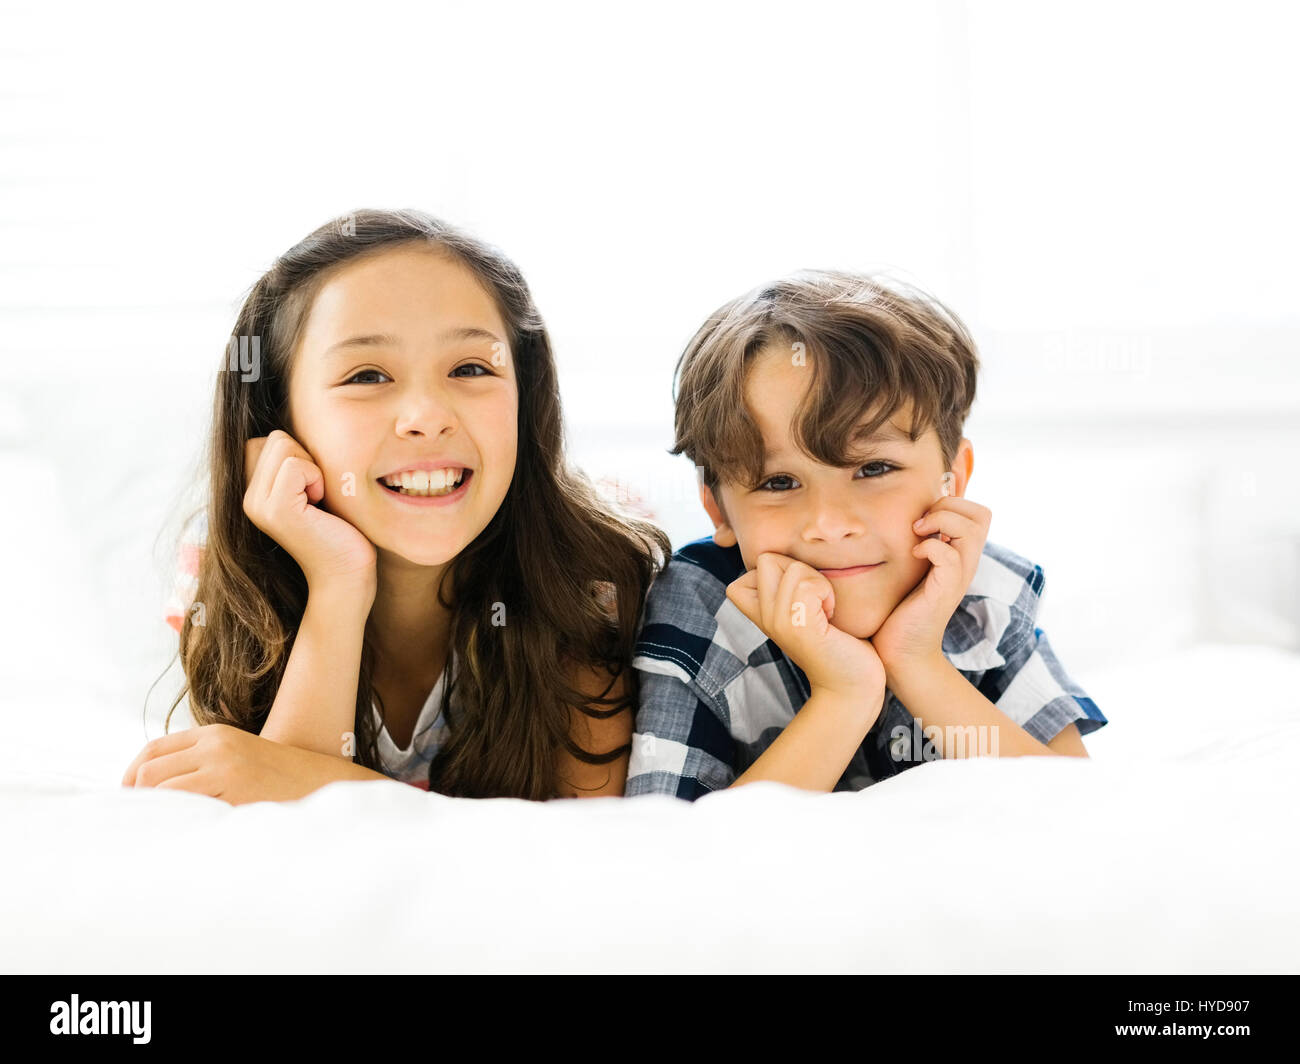 Siblings (10-11, 6-7) lying in bed side by side Stock Photo